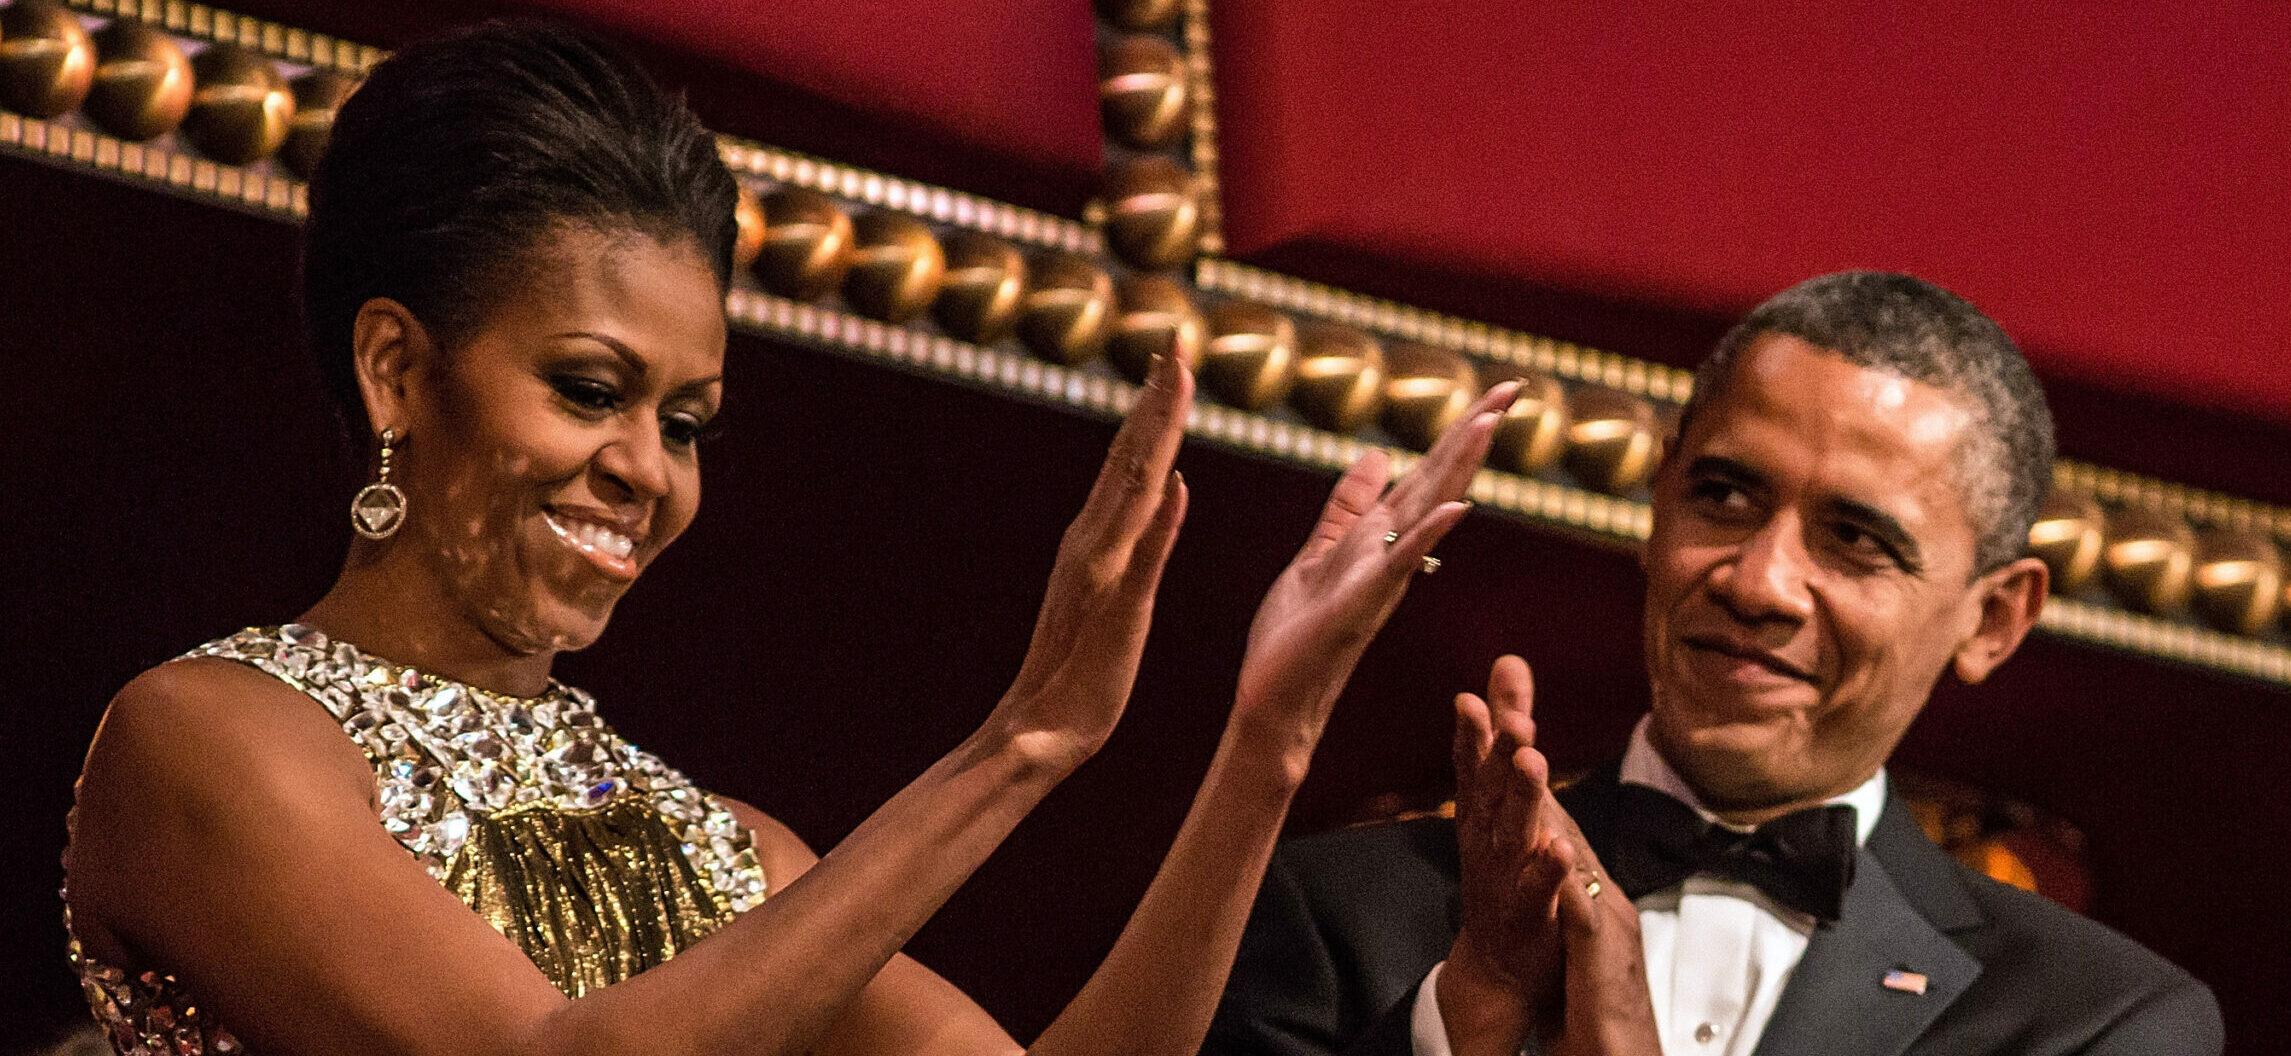 Barack & Michelle Obama at the 2012 Kennedy Center Honors Reception